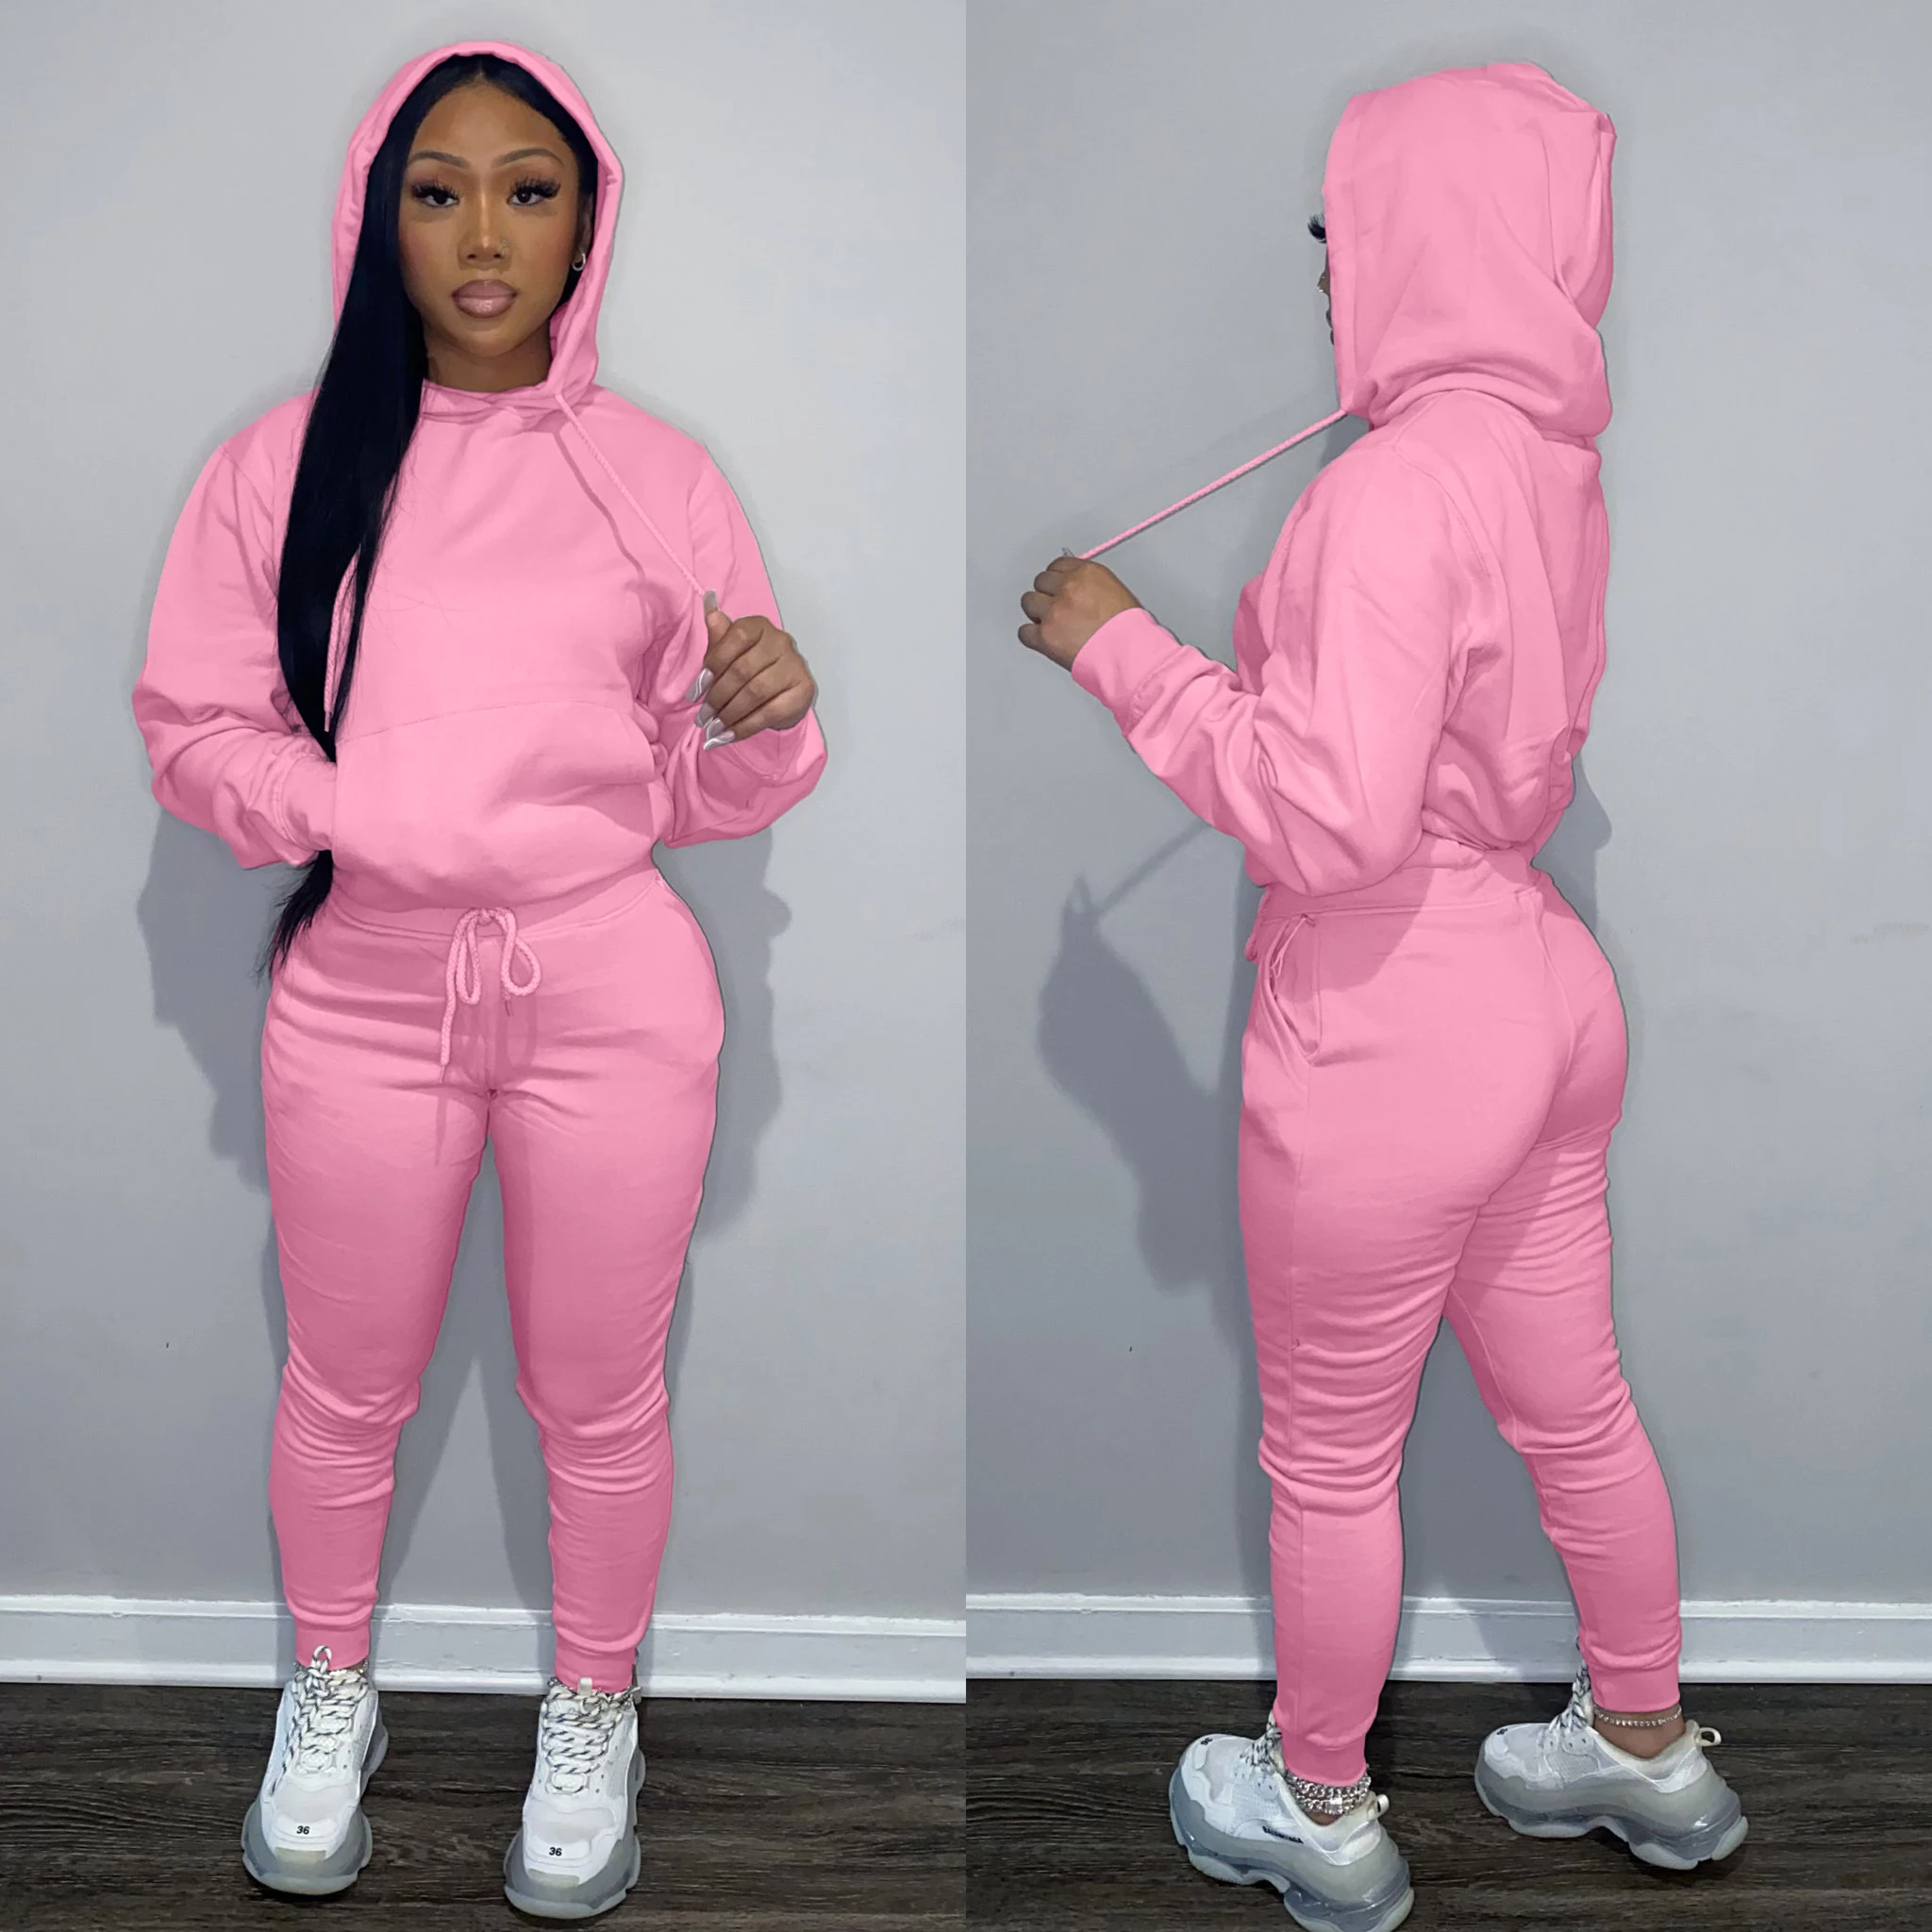 

Fall Winter 2021 Women Clothes Hoodies Outfits Two Piece Pants Sets Street Wear Clothing Sweatpants And Hoodie Set Sweat Suits, Khaki,pink,yellow,red,gray,black,coffee,navy blue